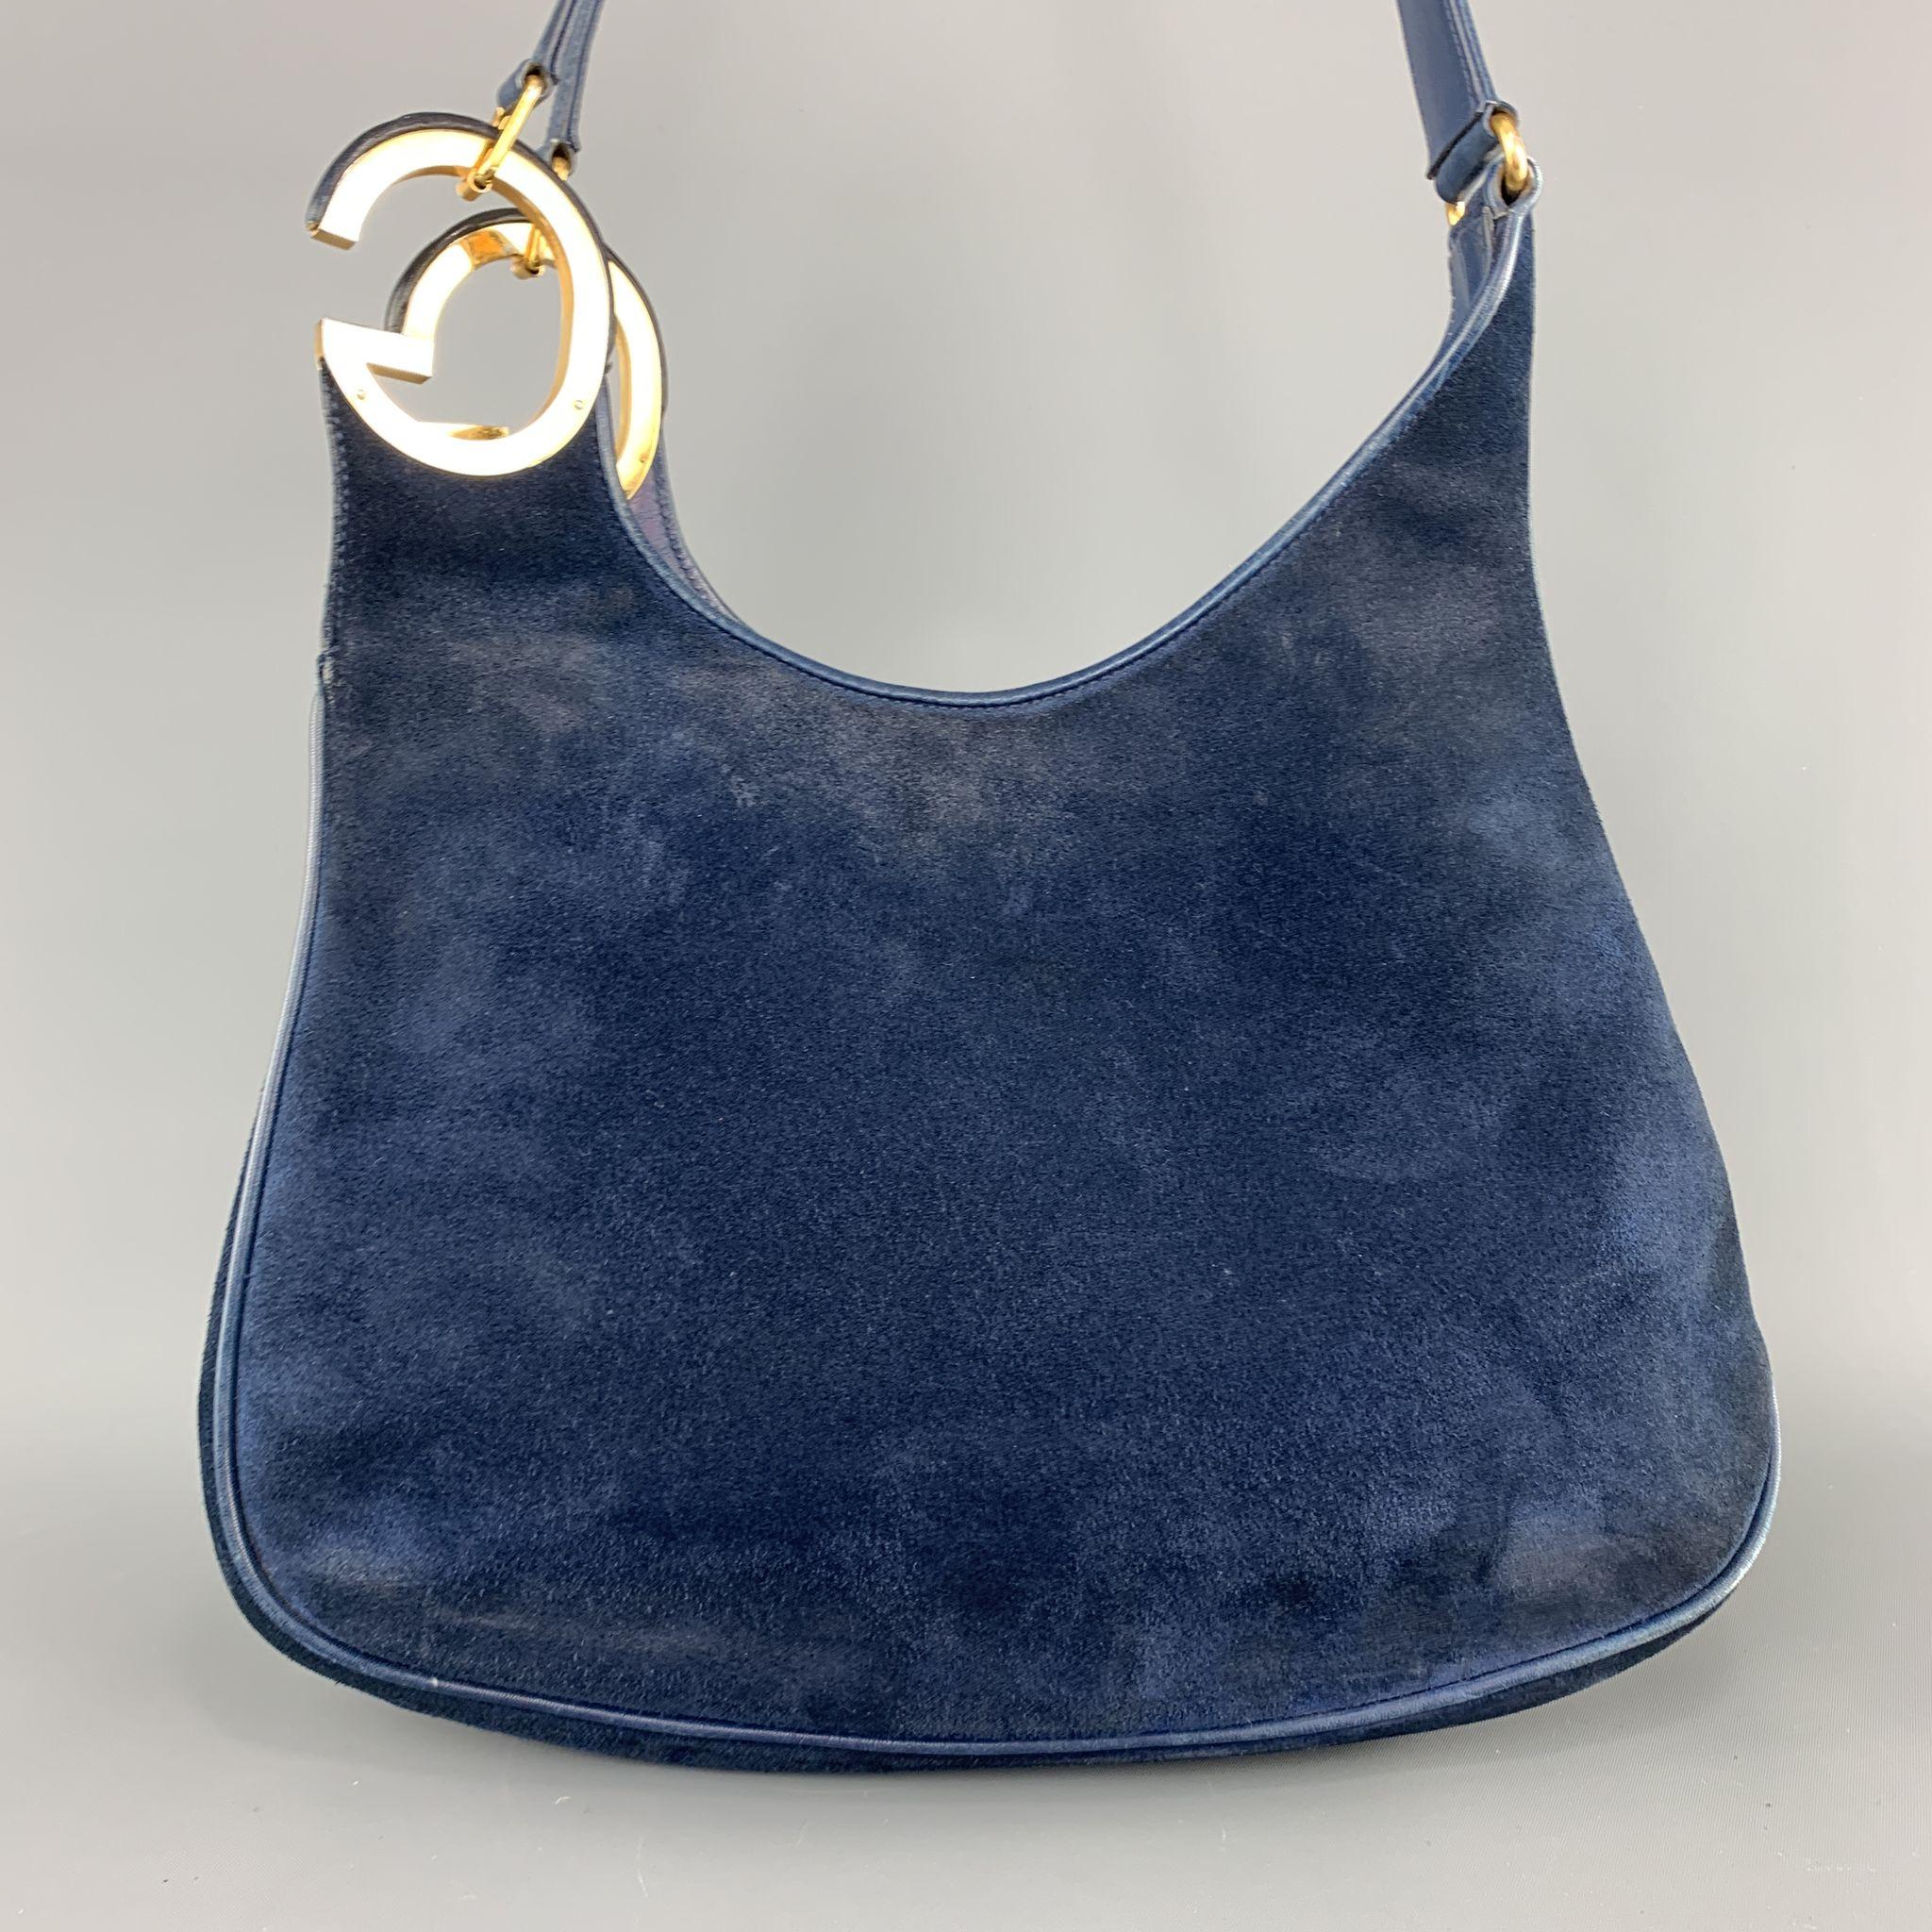 Vintage 1970's-1980's GUCCI shoulder bag comes in navy blue suede with leather piping, yellow gold tone metal hardware, and double oversized GG metal accent. Wear and aging throughout leather and suede. As-is. Made in Italy.

Good Pre-Owned